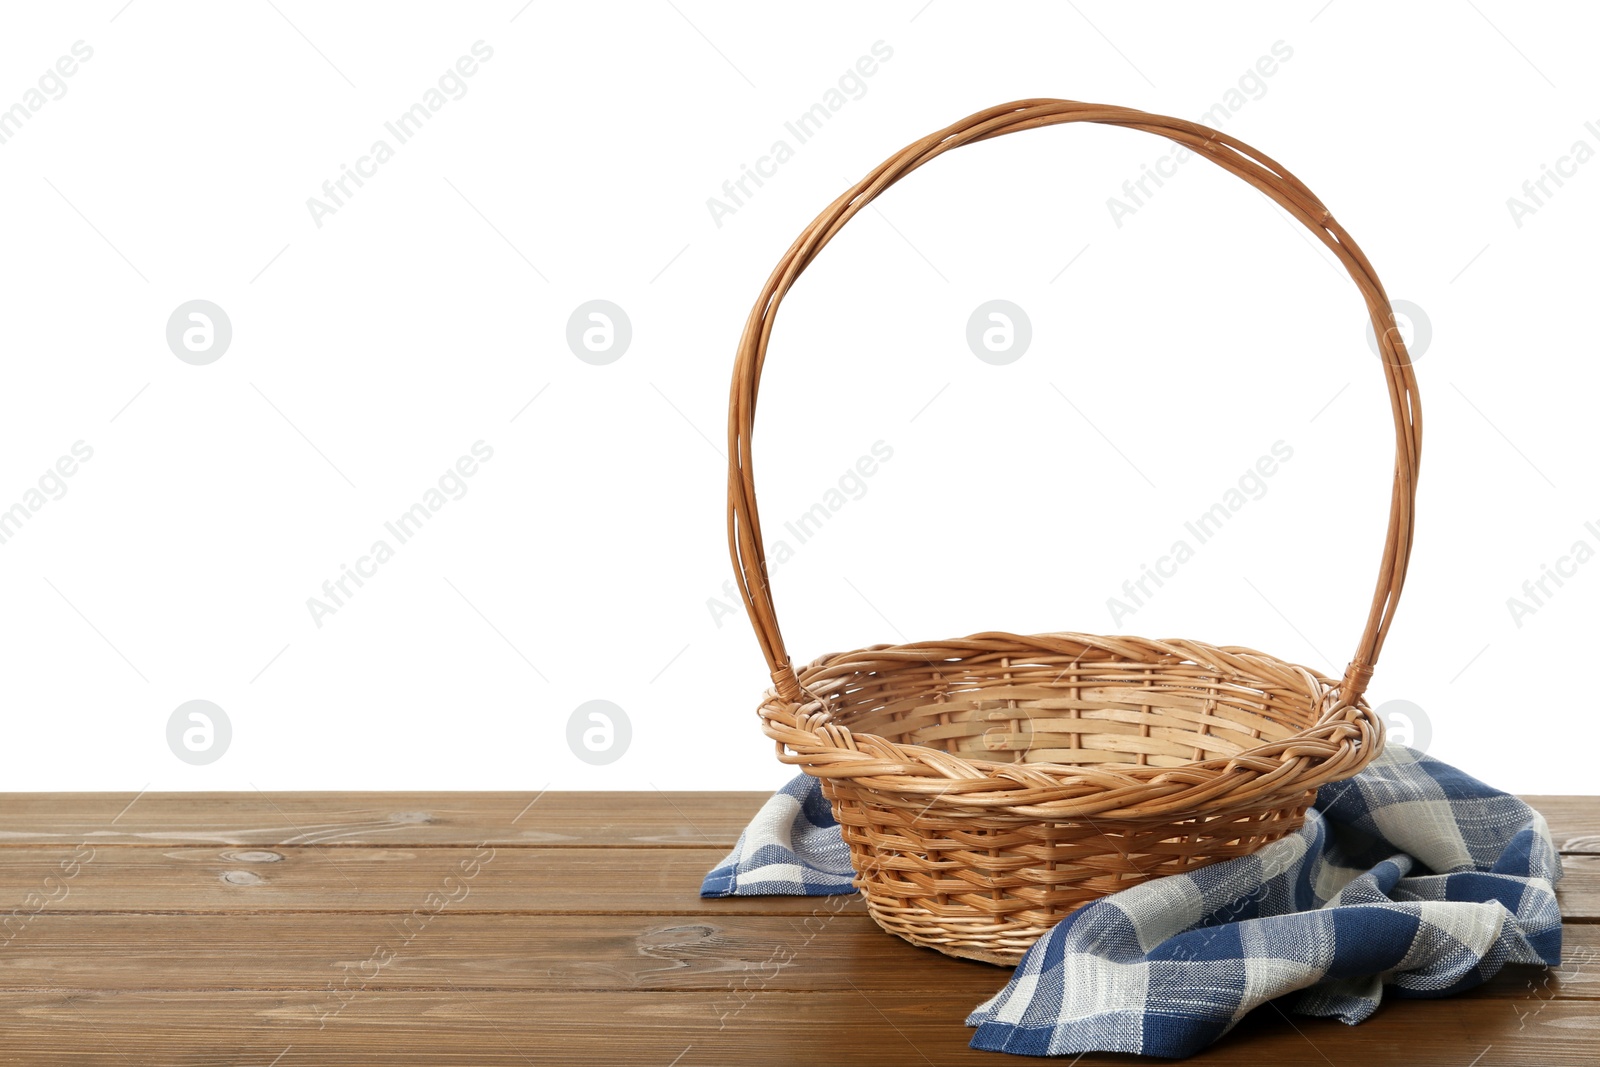 Photo of Wicker basket and towel on wooden table against white background, space for text. Easter item